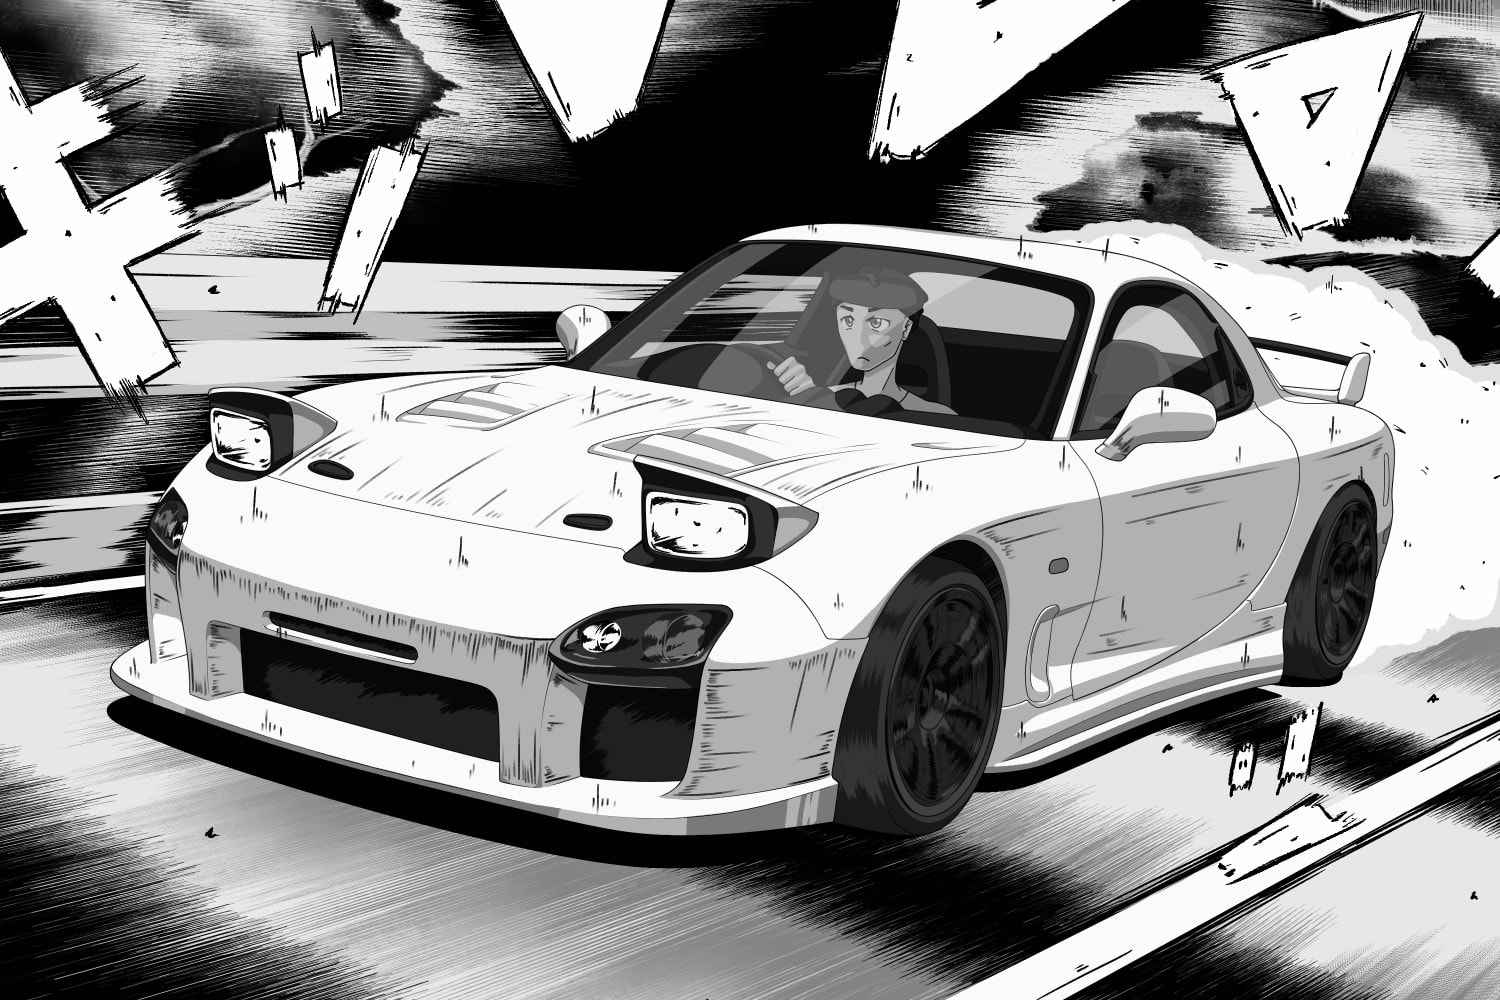 2024 Acura Integra Type S Becomes An Anime Hero Car In Season 2 Of  'Chiaki's Journey' | Carscoops